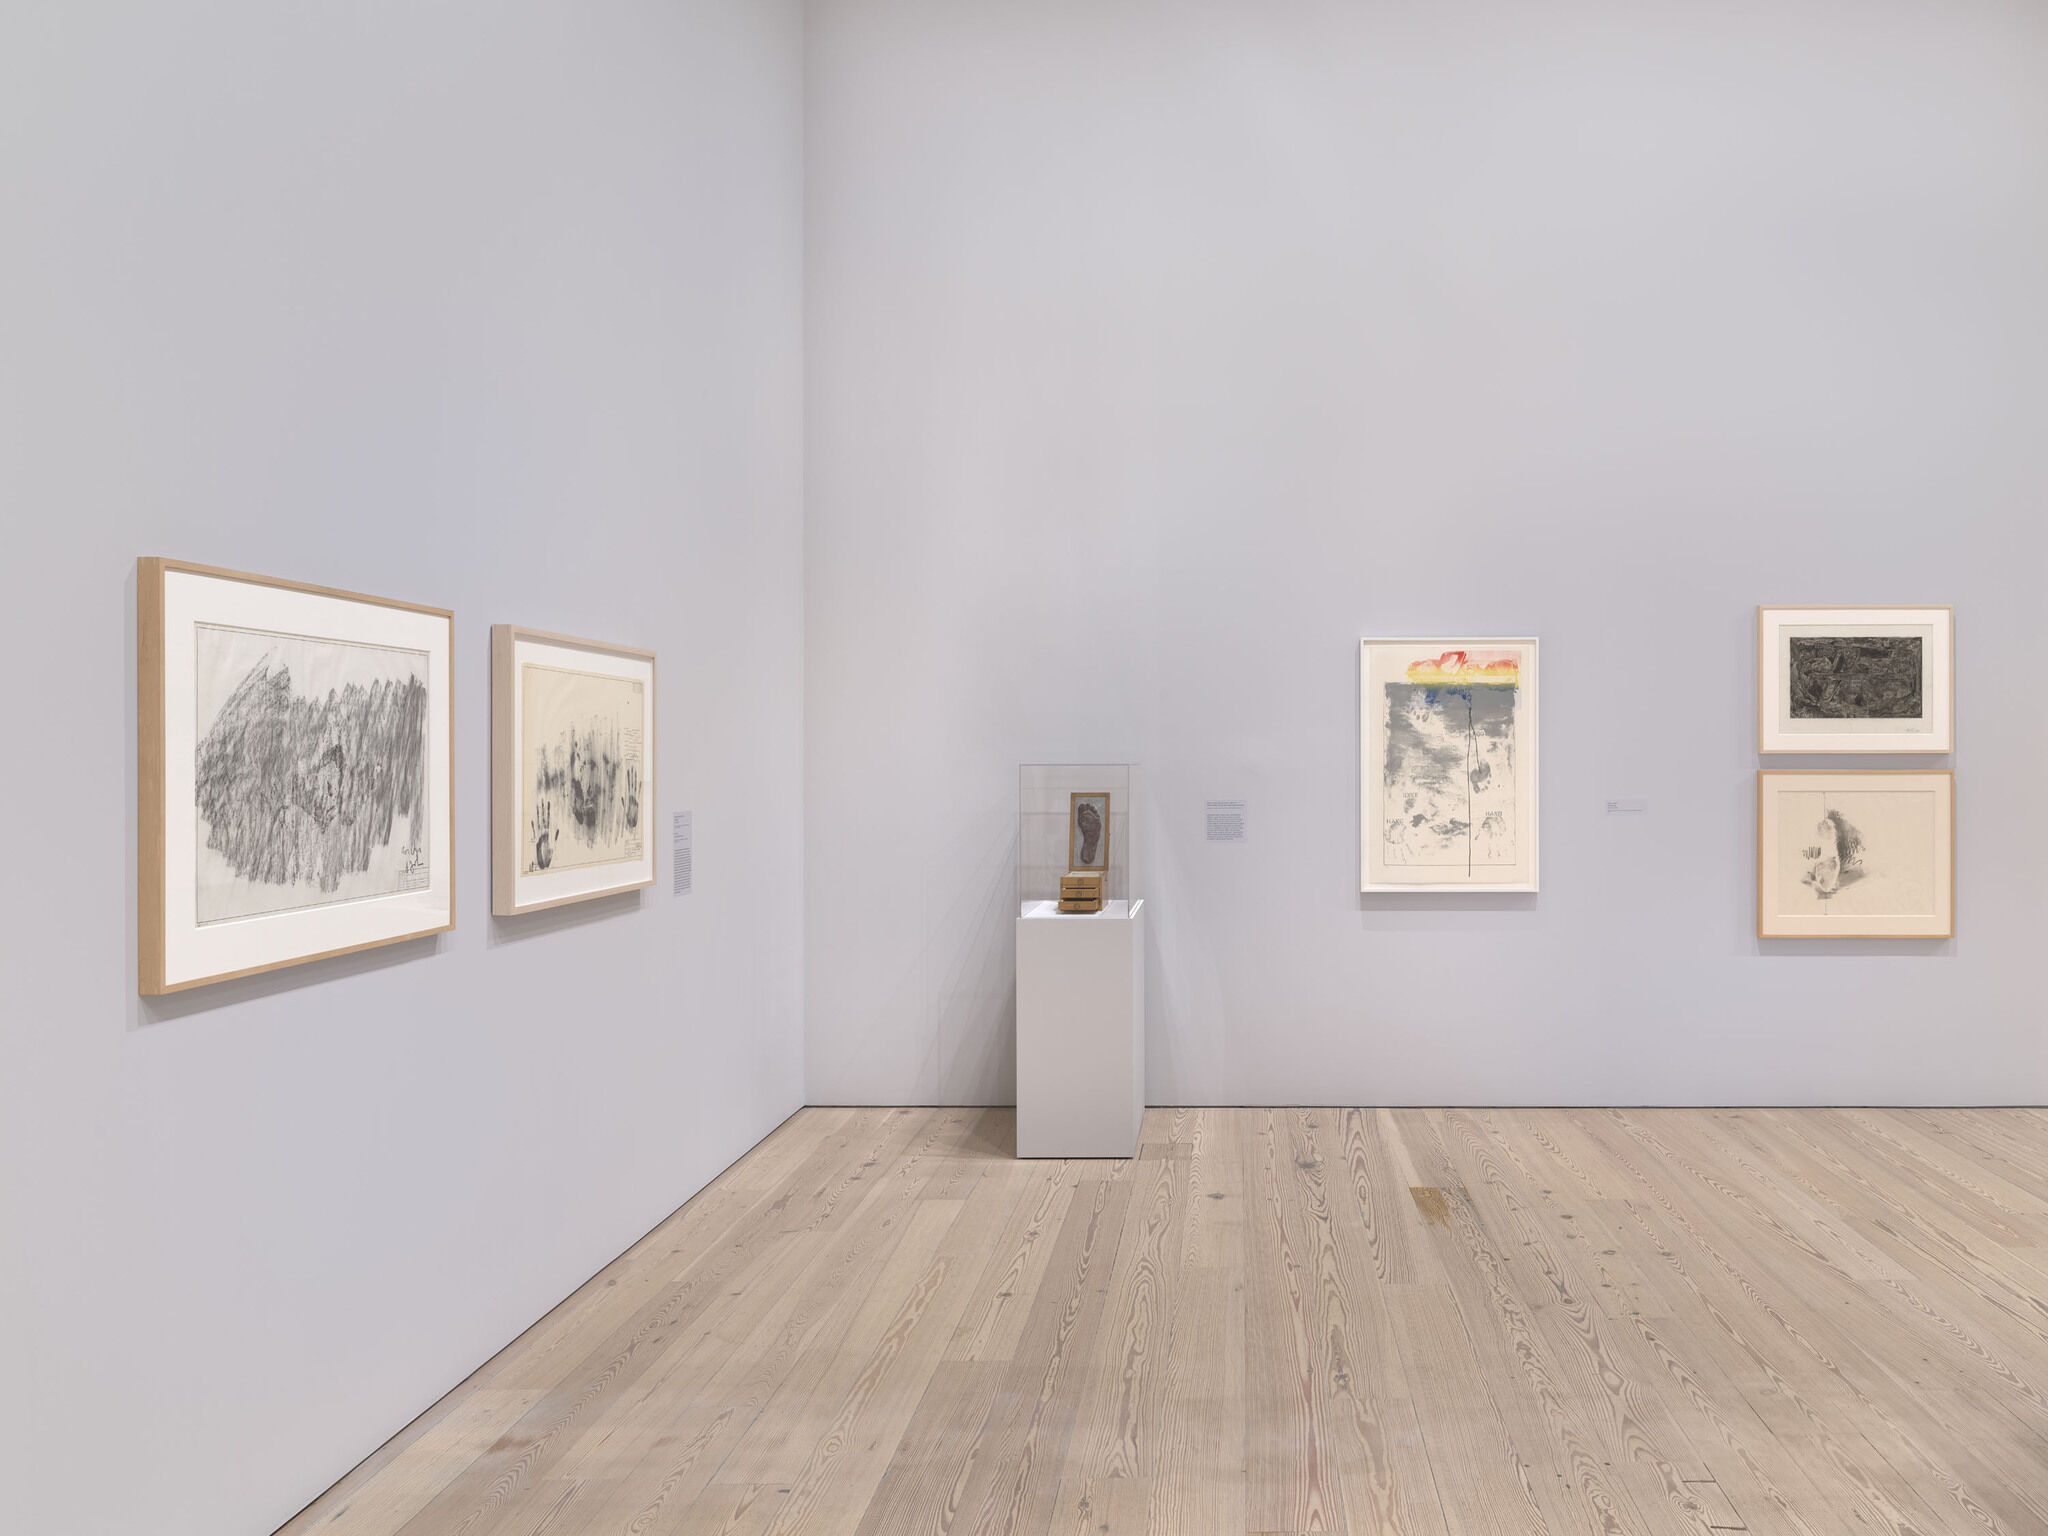 A white exhibition room with five framed works and a sixth work encased in glass.